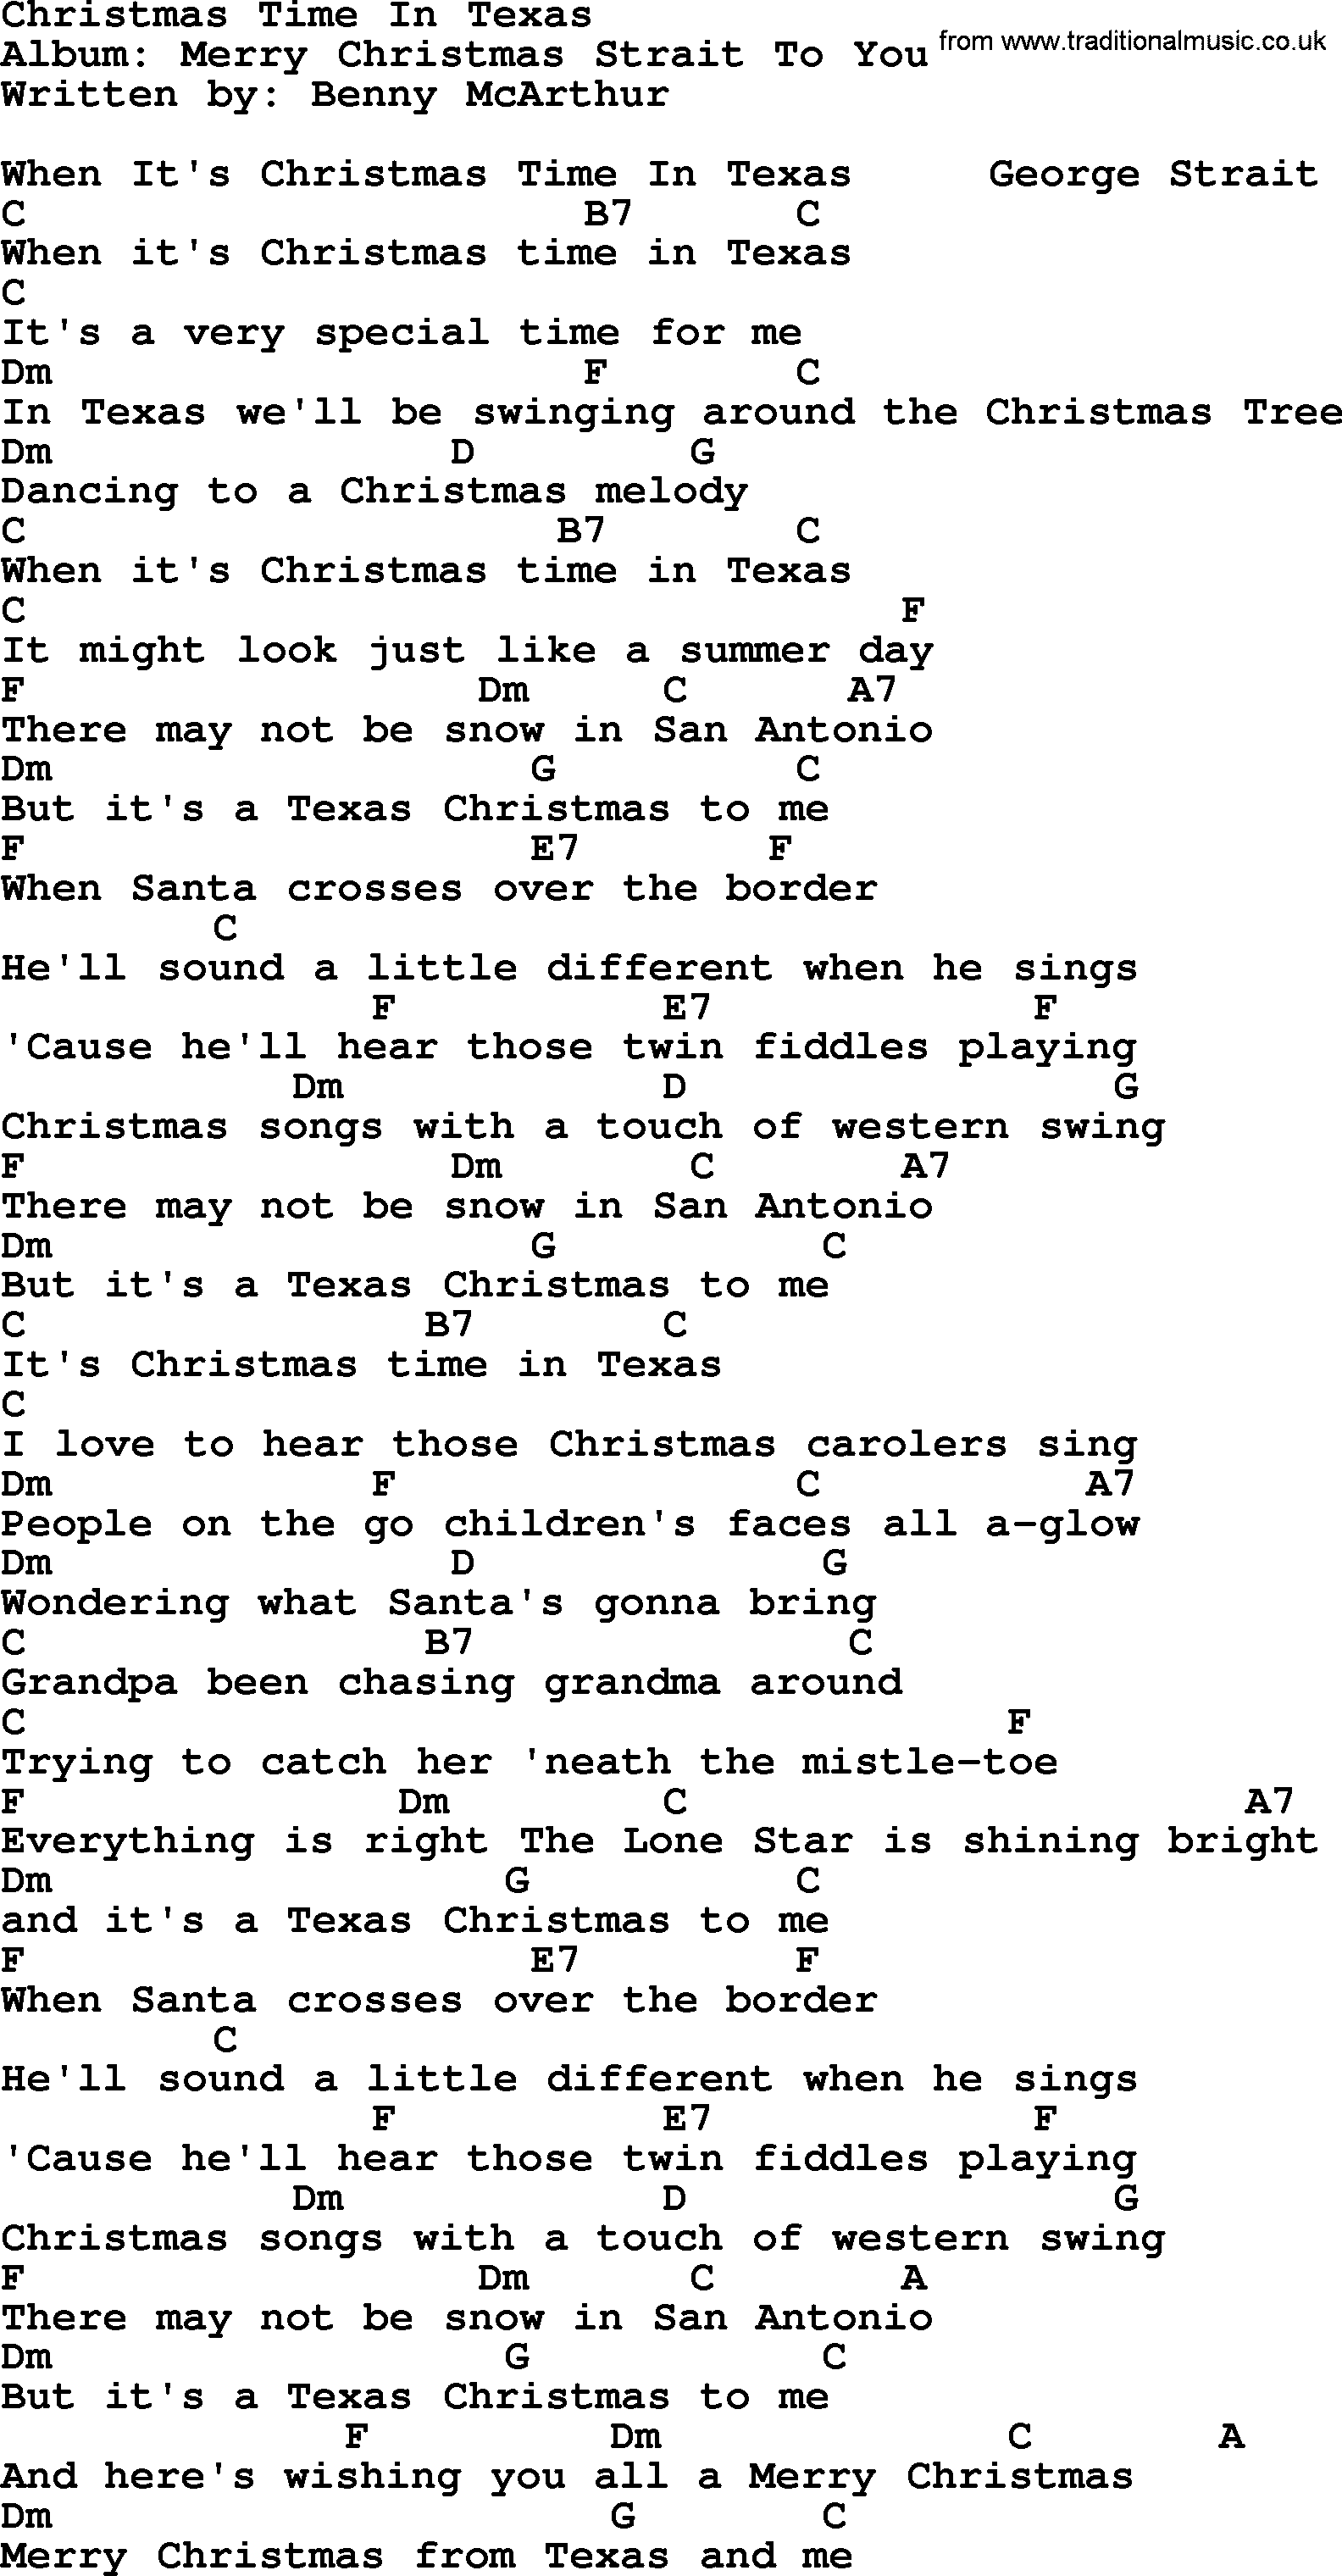 George Strait song: Christmas Time In Texas, lyrics and chords